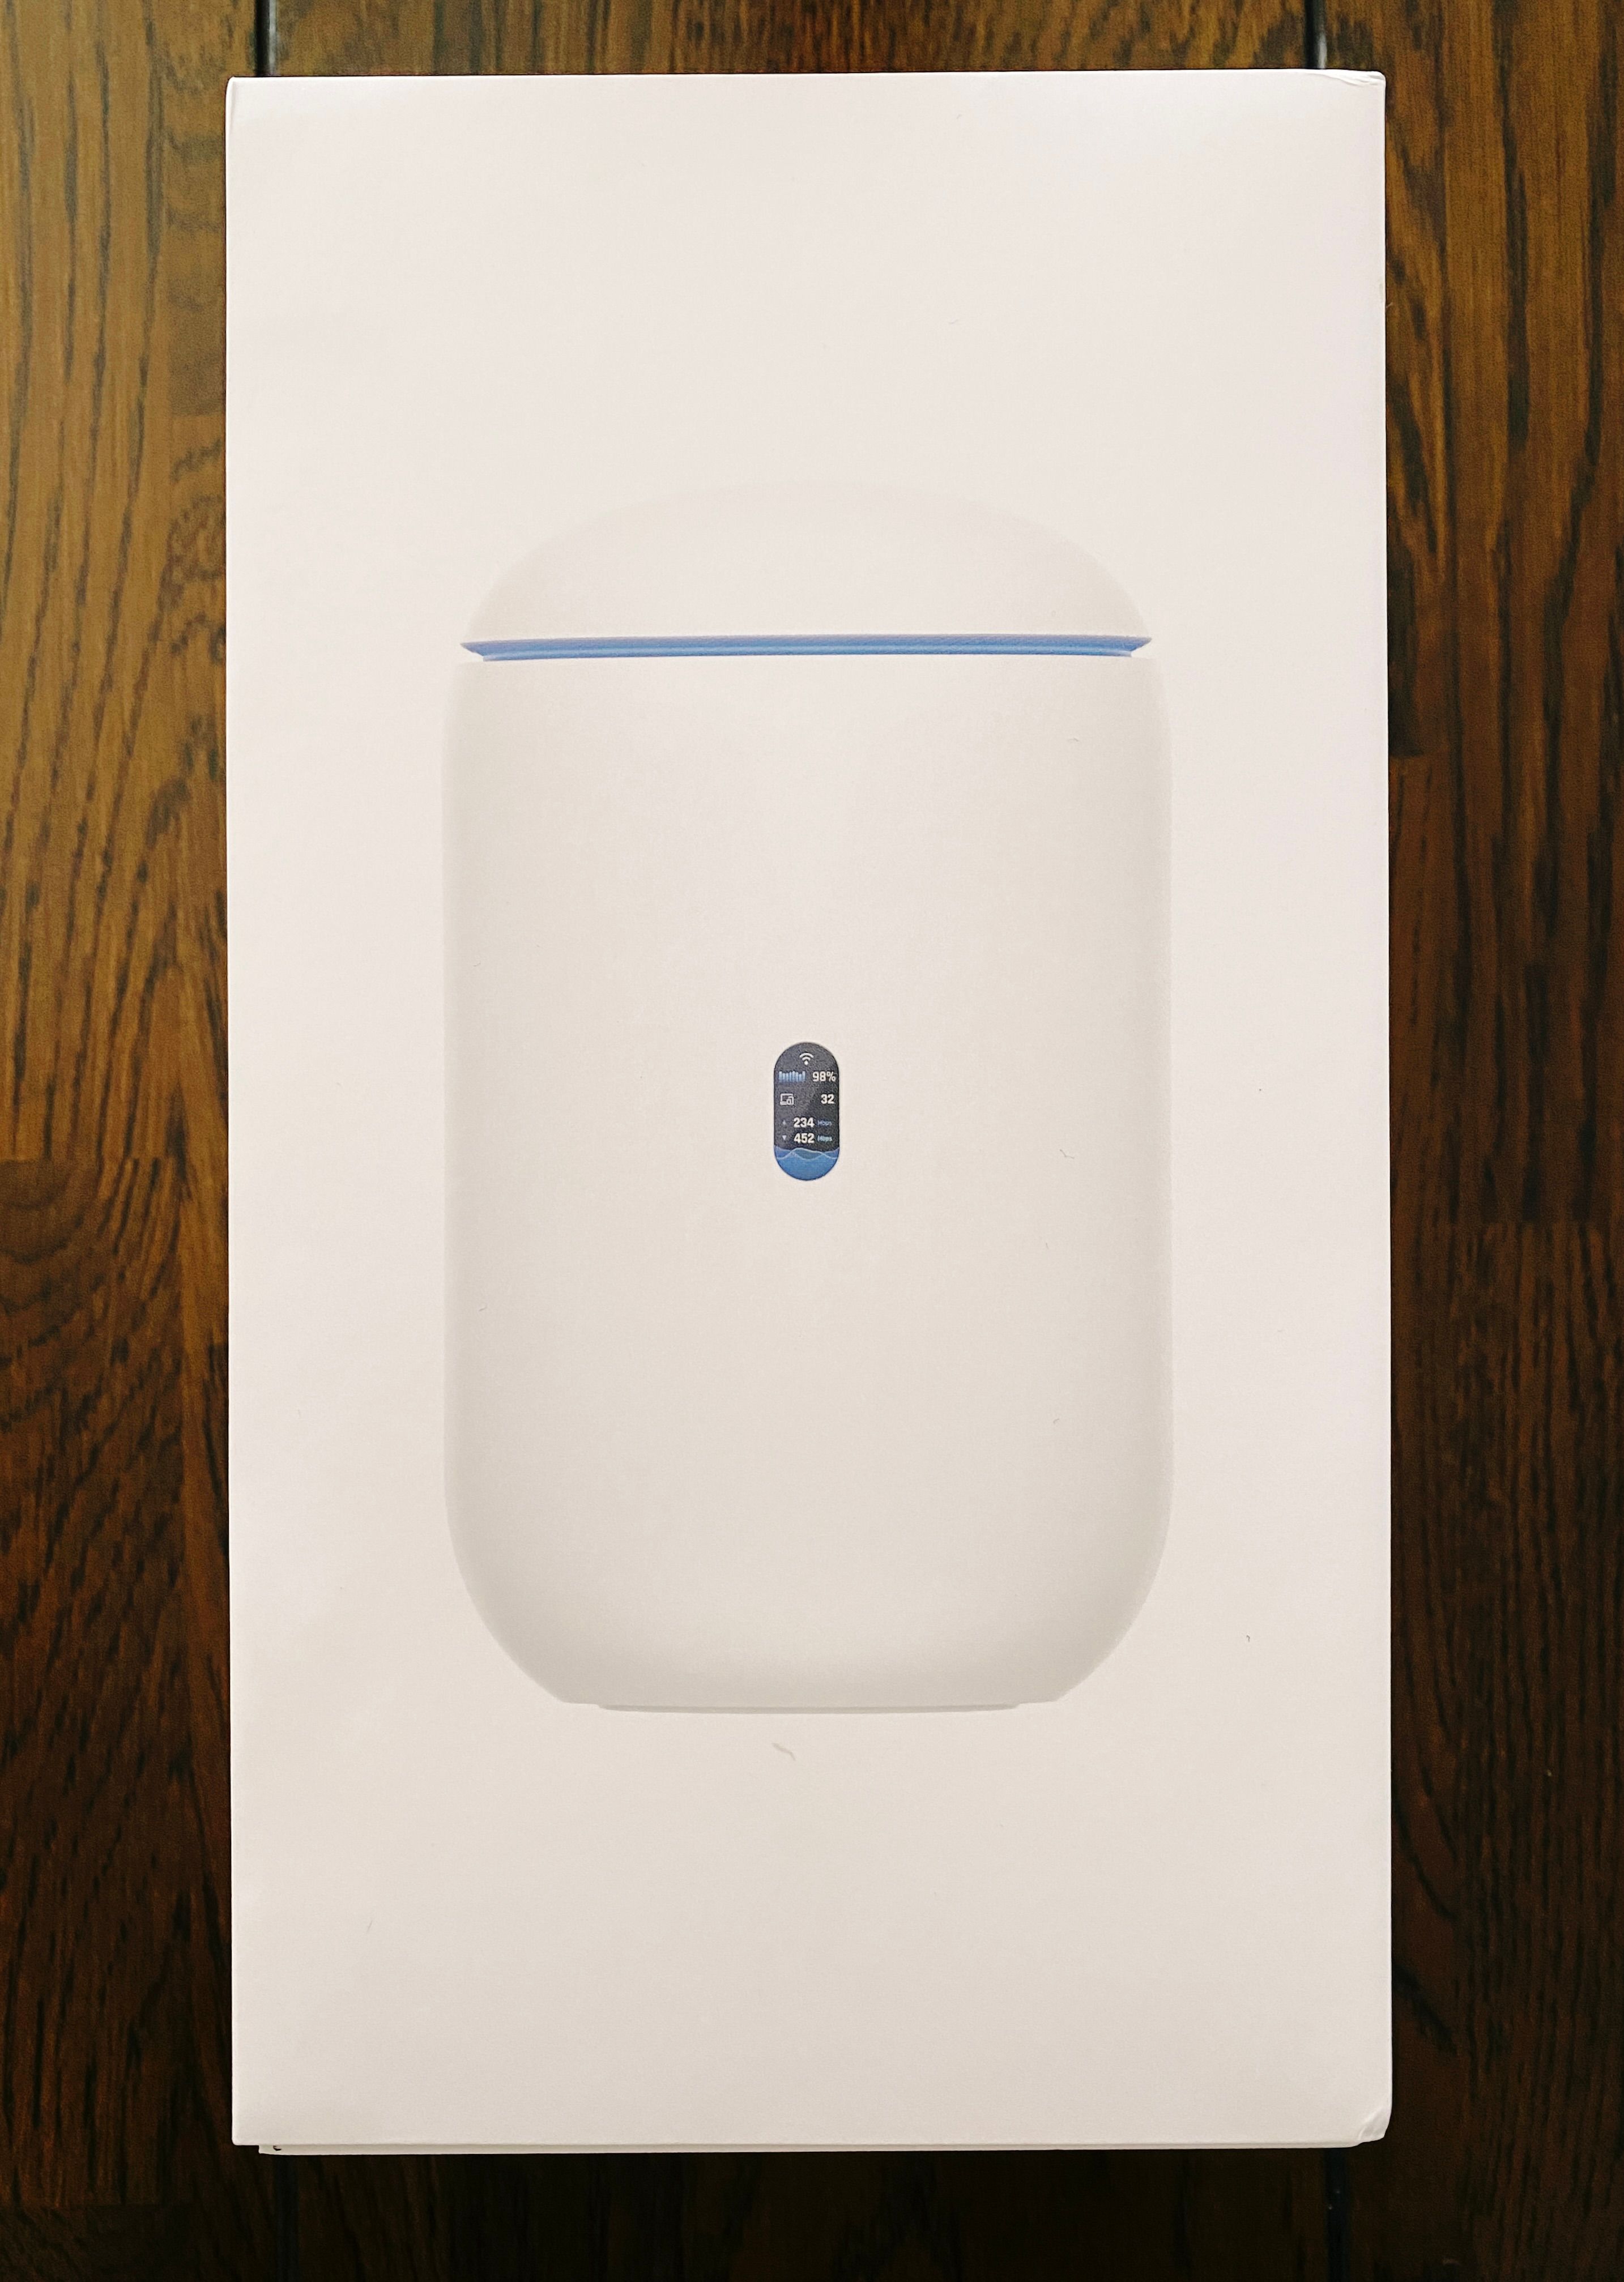 A photo of the box of the Dream Router. The router itself looks like a little squat white cylinder with a ring around the top and a gently curved top and bottom.